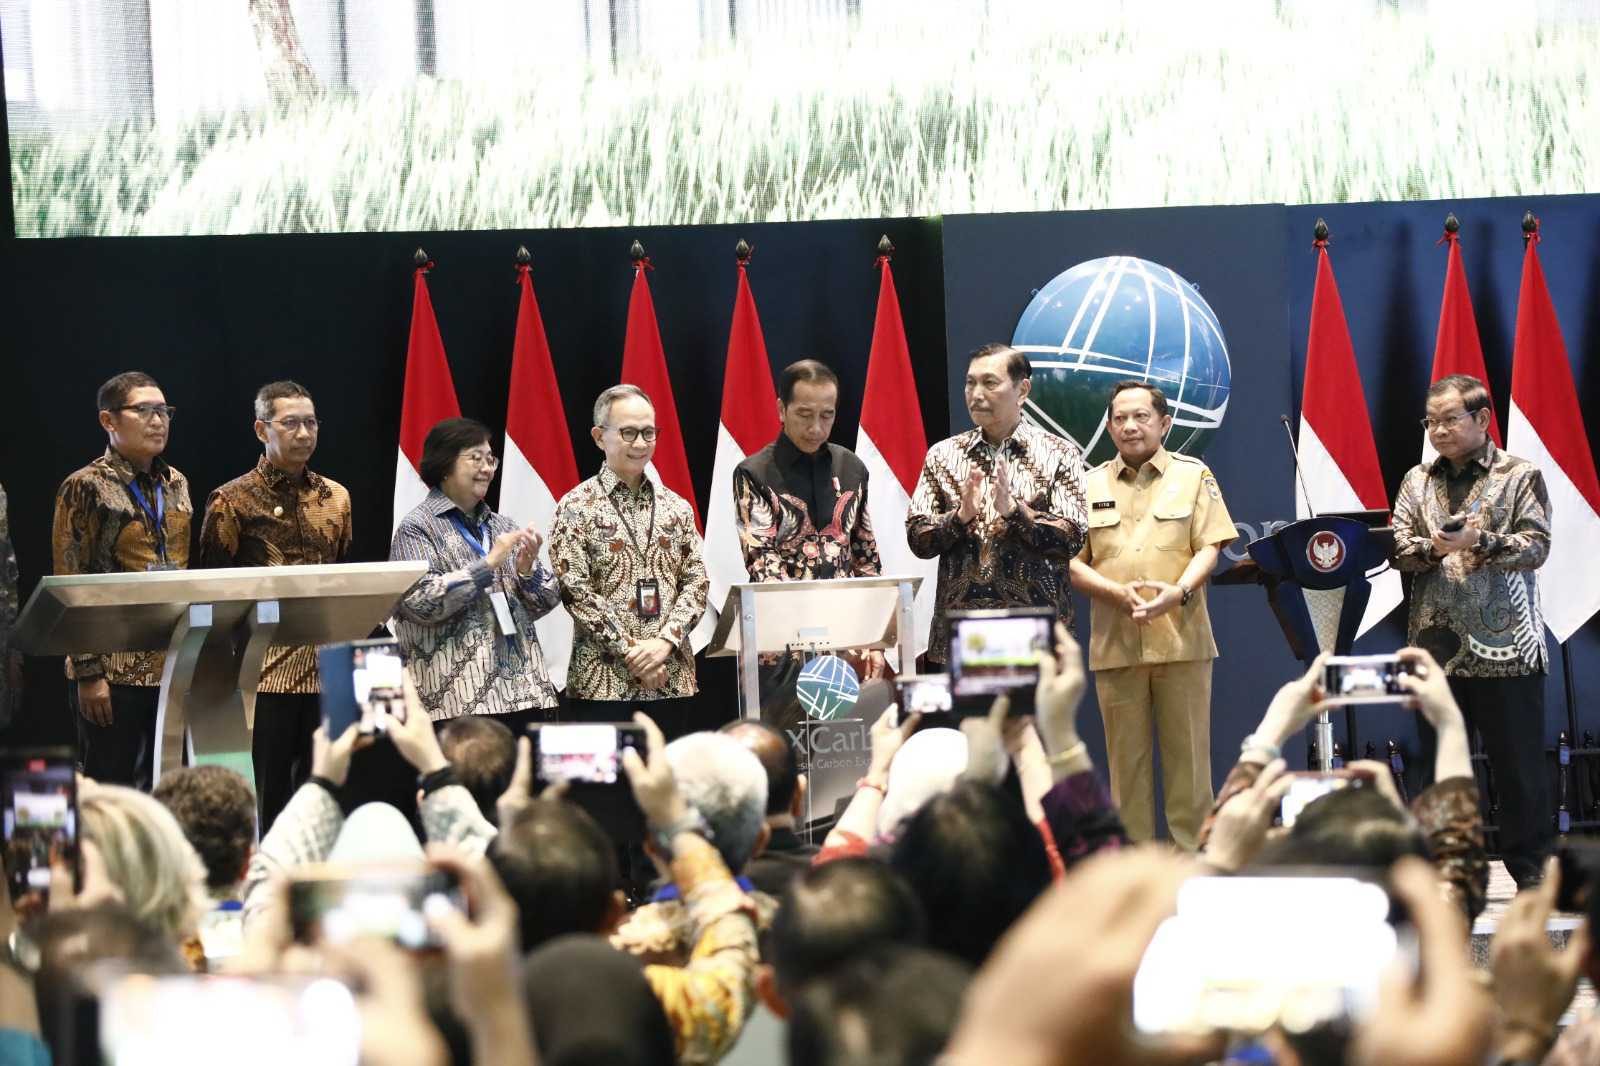 Carbon trading may help fund Indonesia's green projects in future